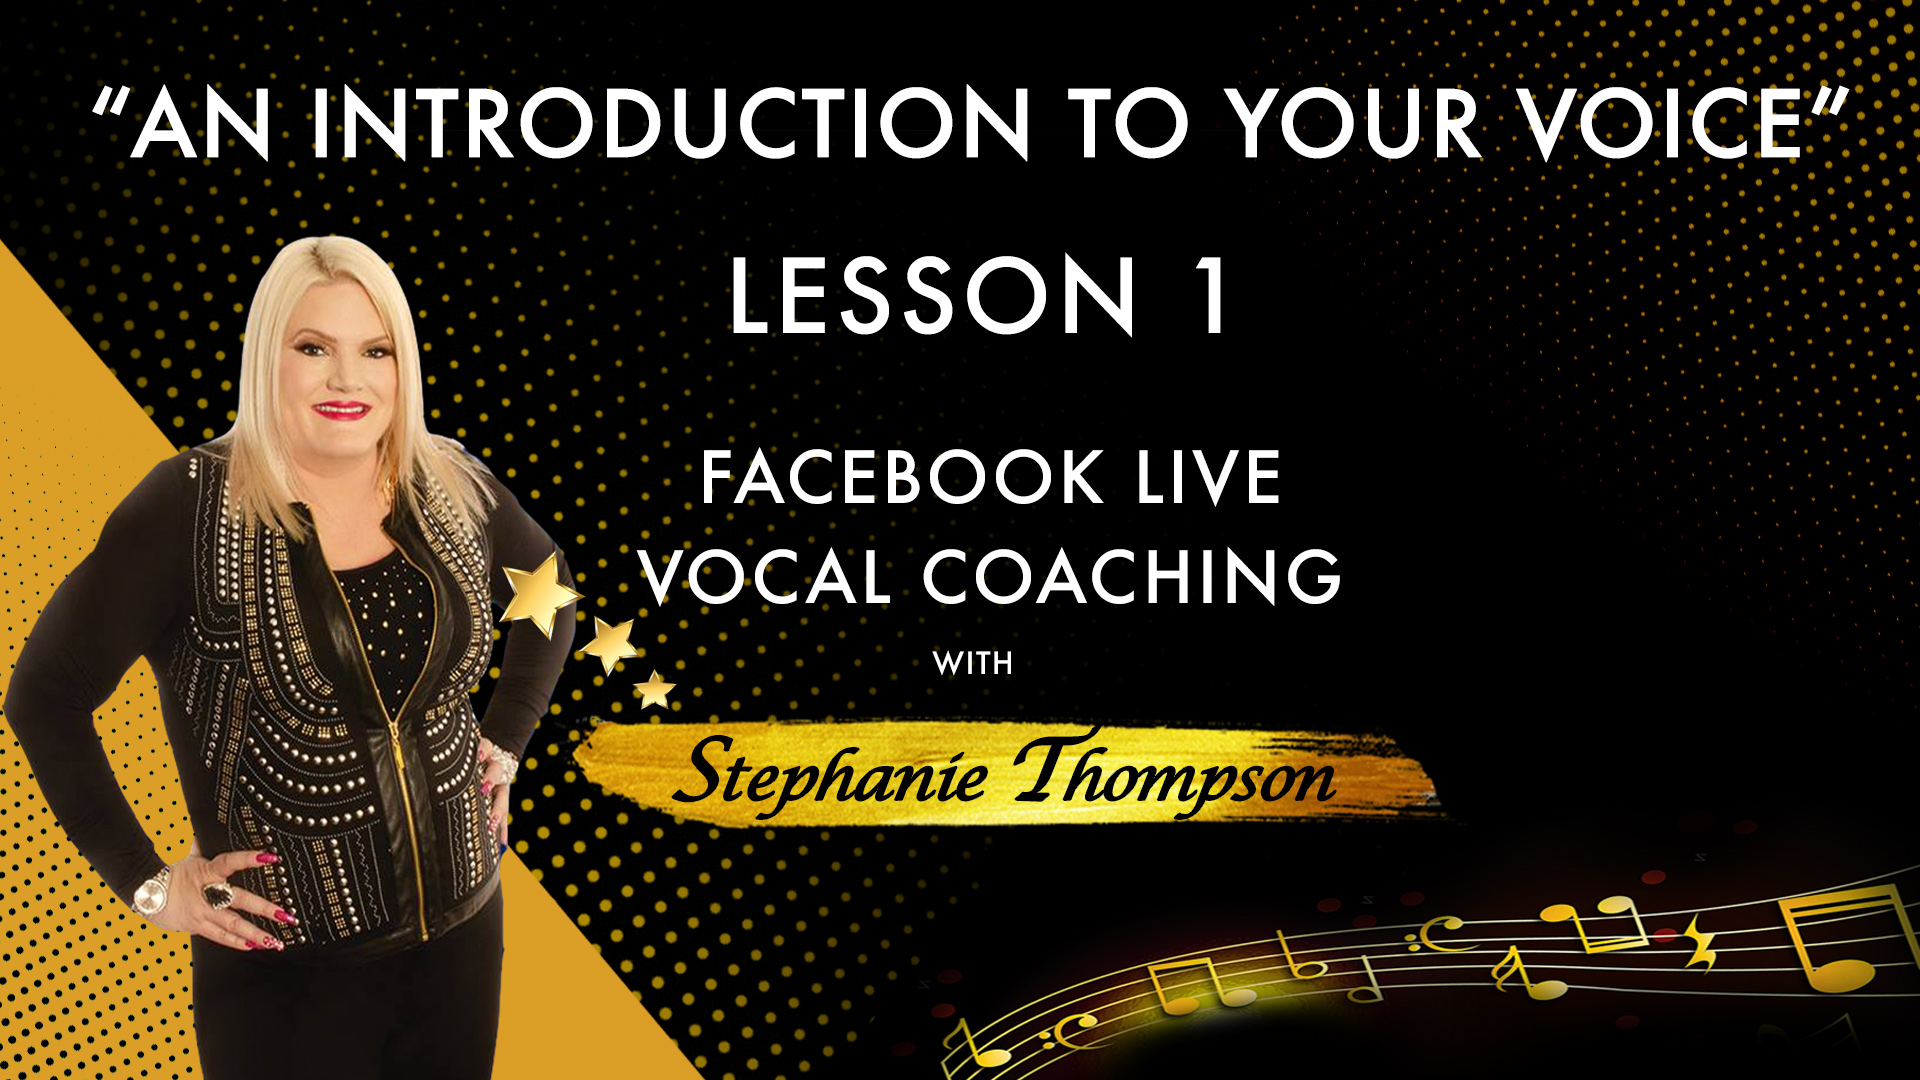 Lesson 1 - An Introduction to Your Voice